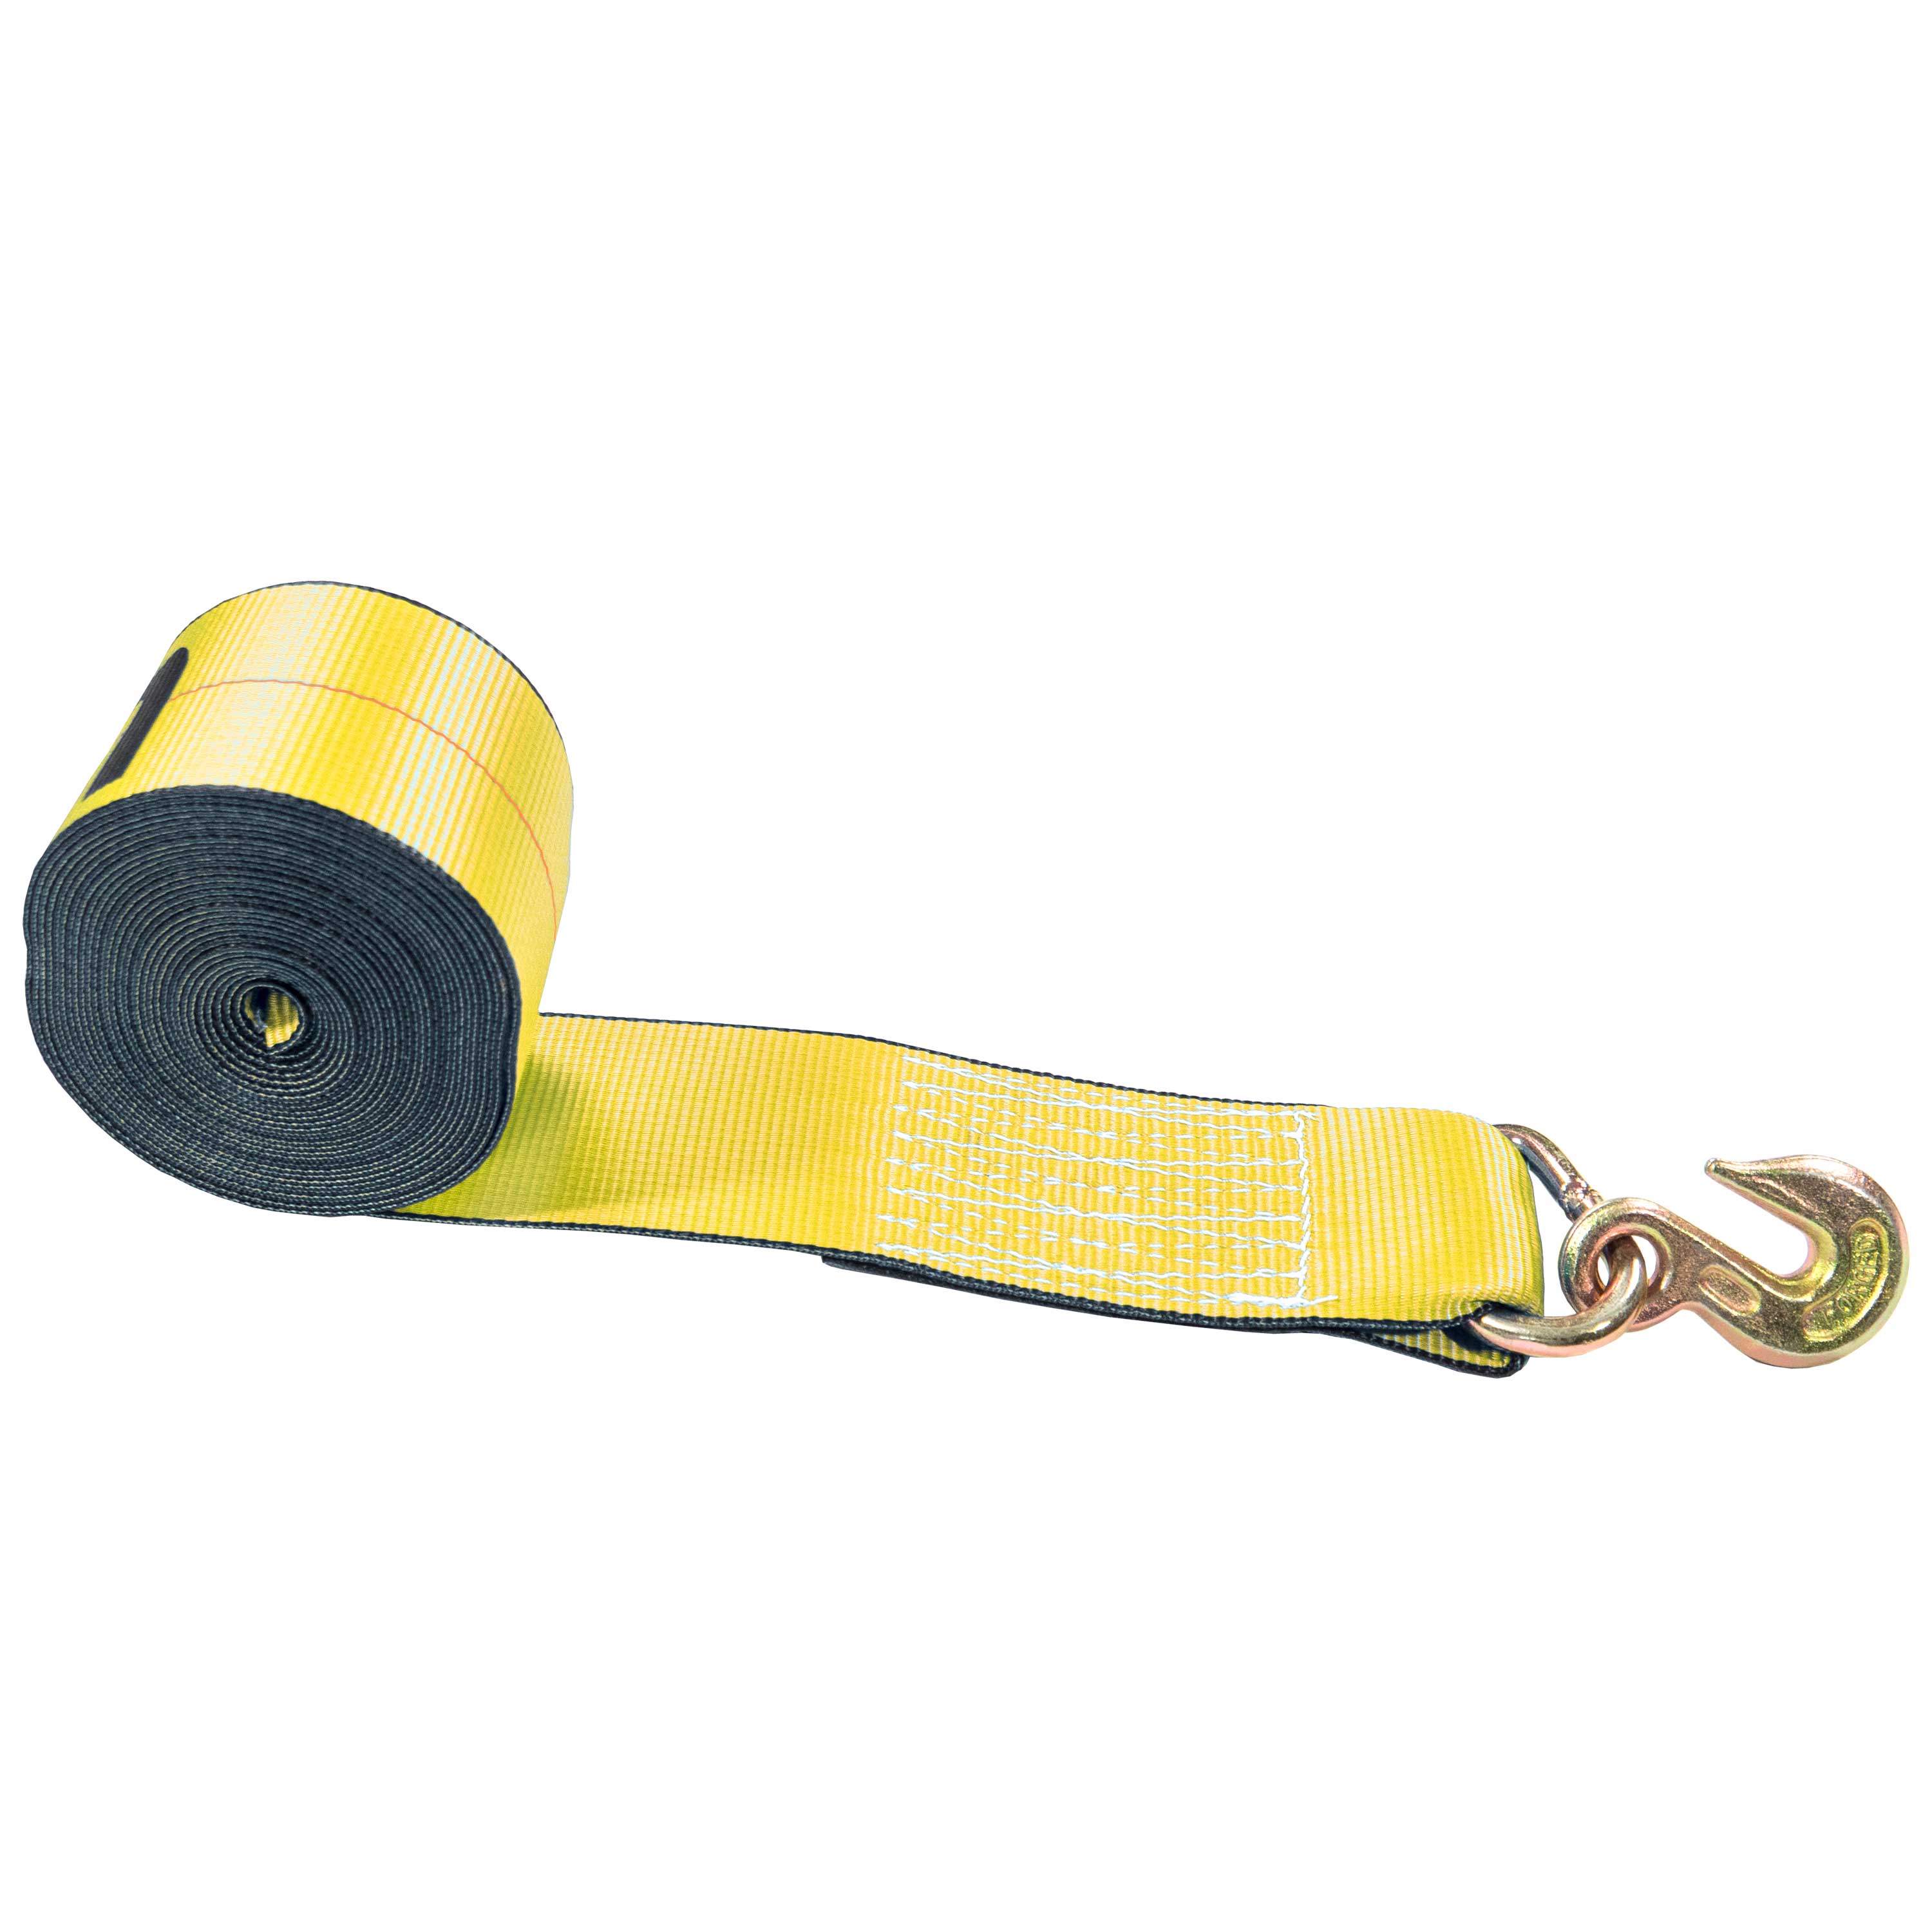 4 inch x 27' Winch Straps with Grab Hook